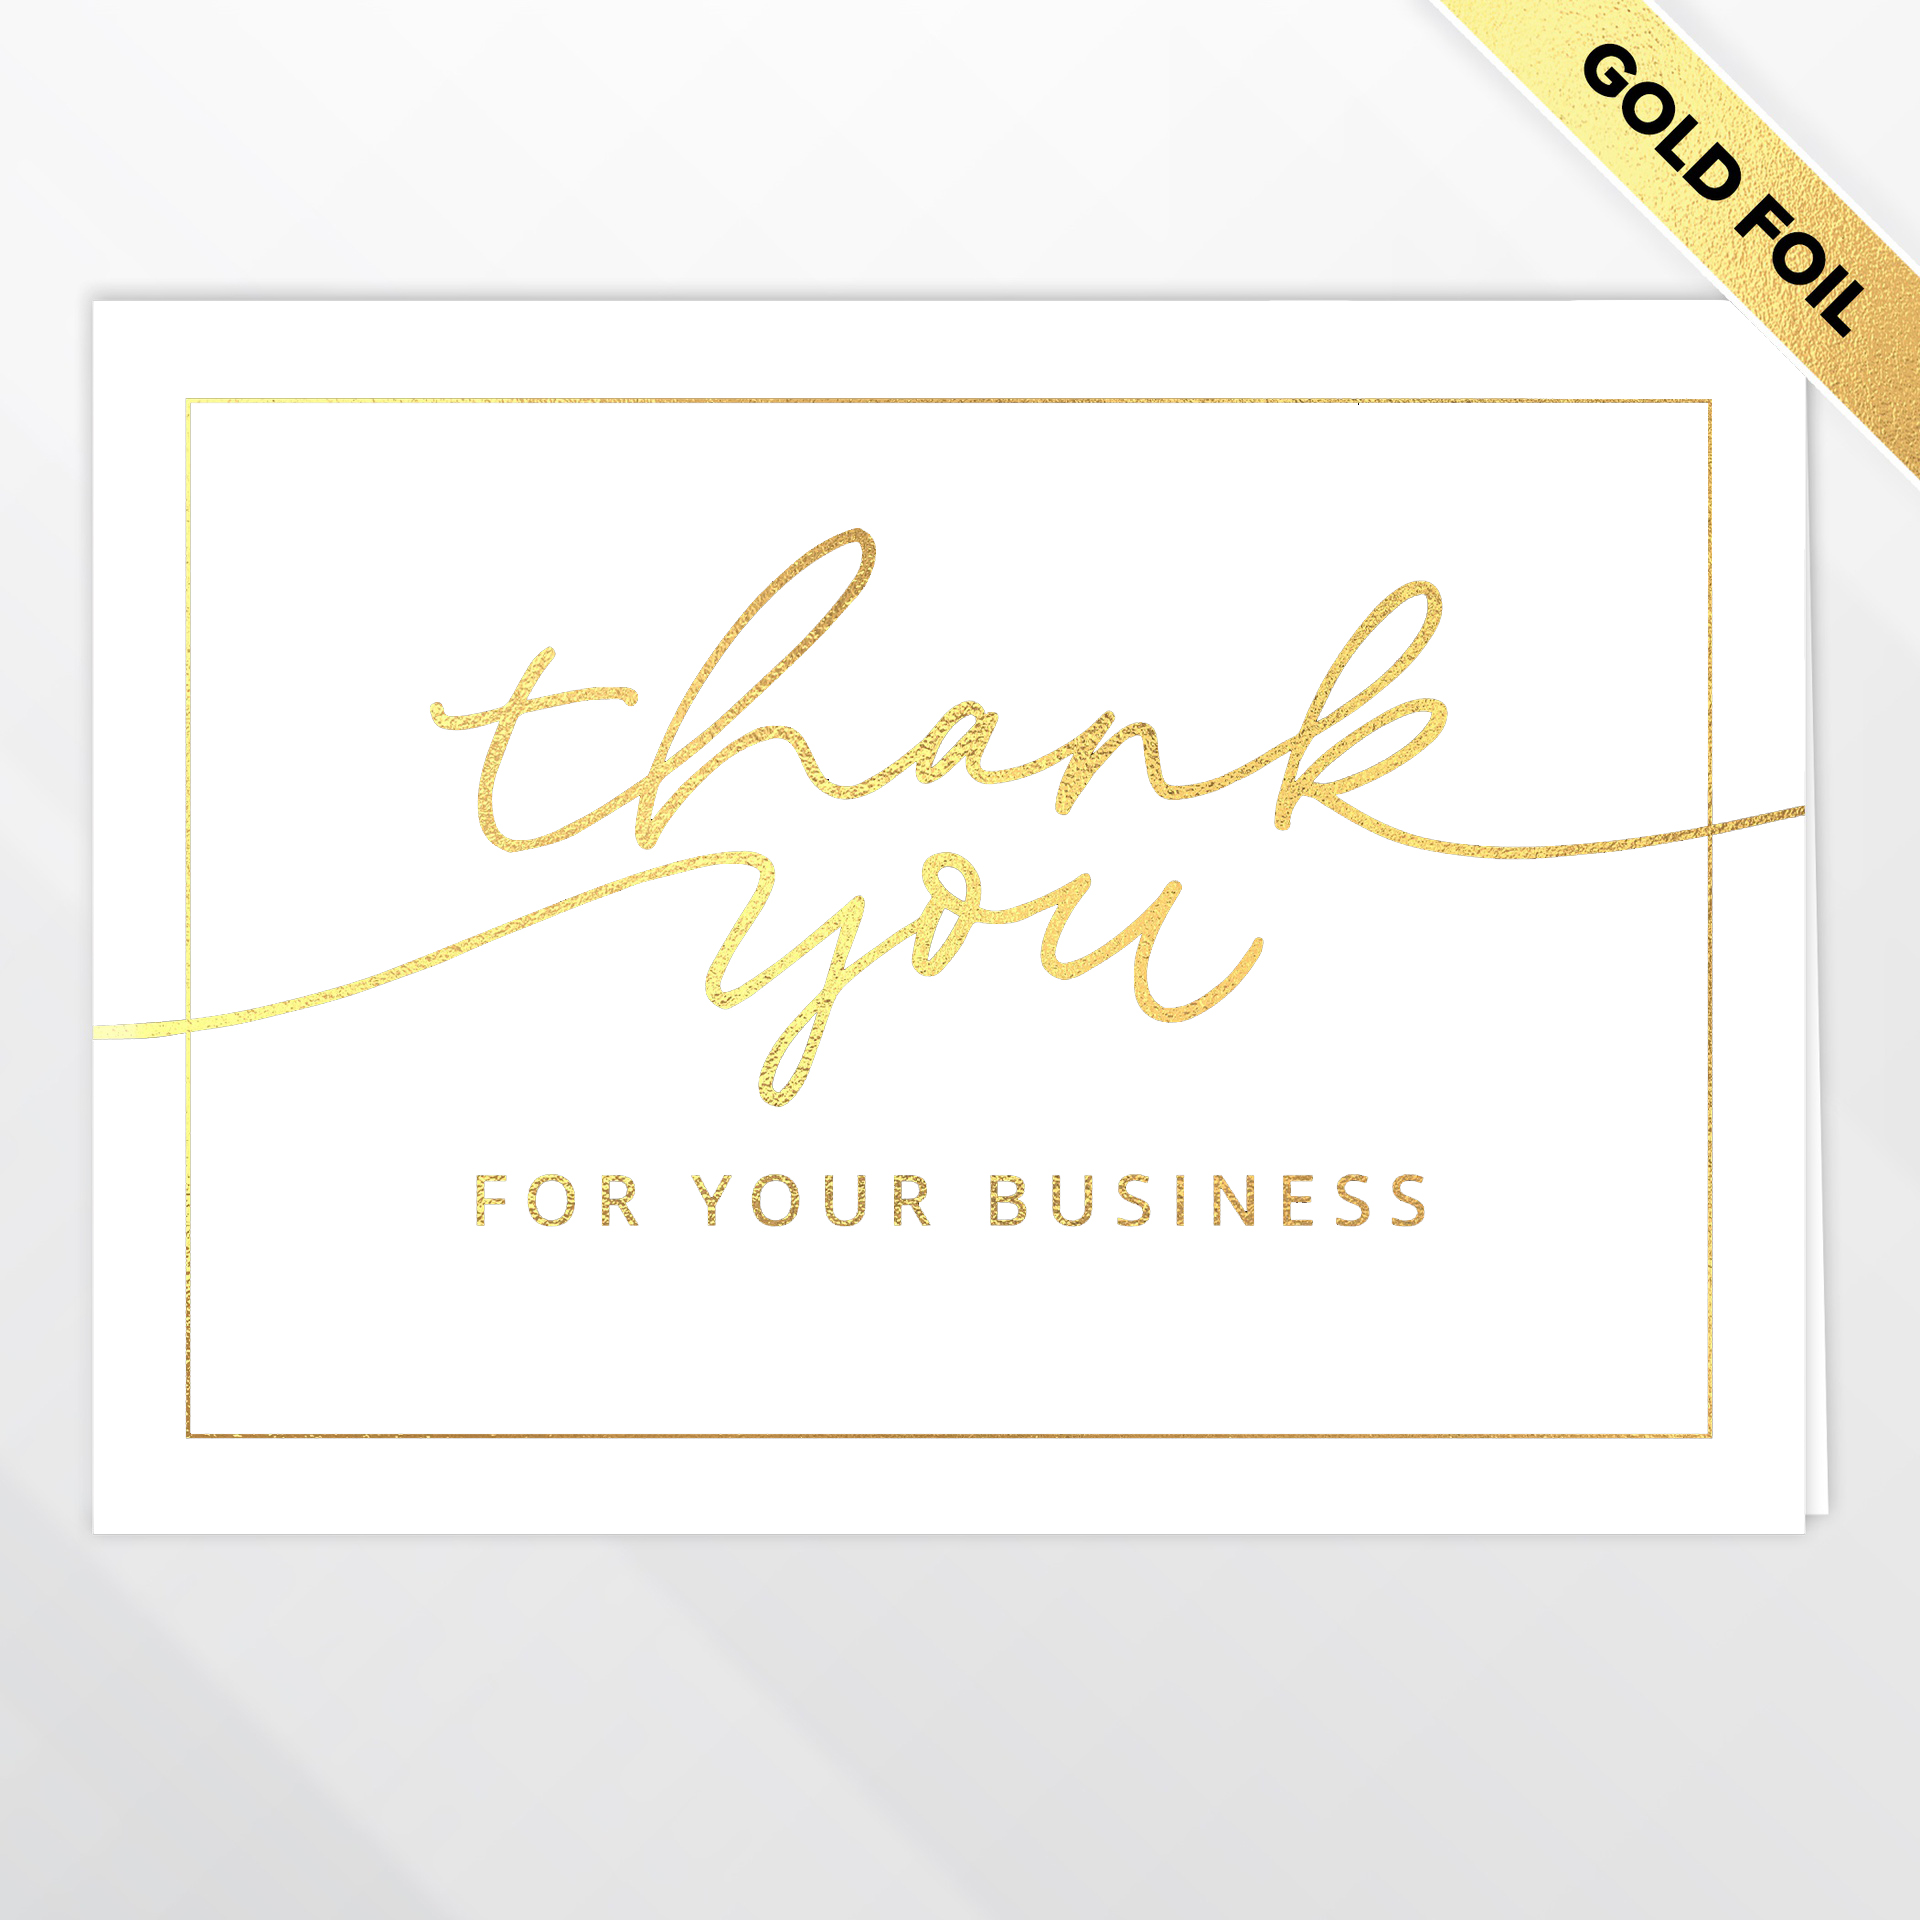 SUPREME IMPRESSION Thank You Cards Small Business 100 Pack